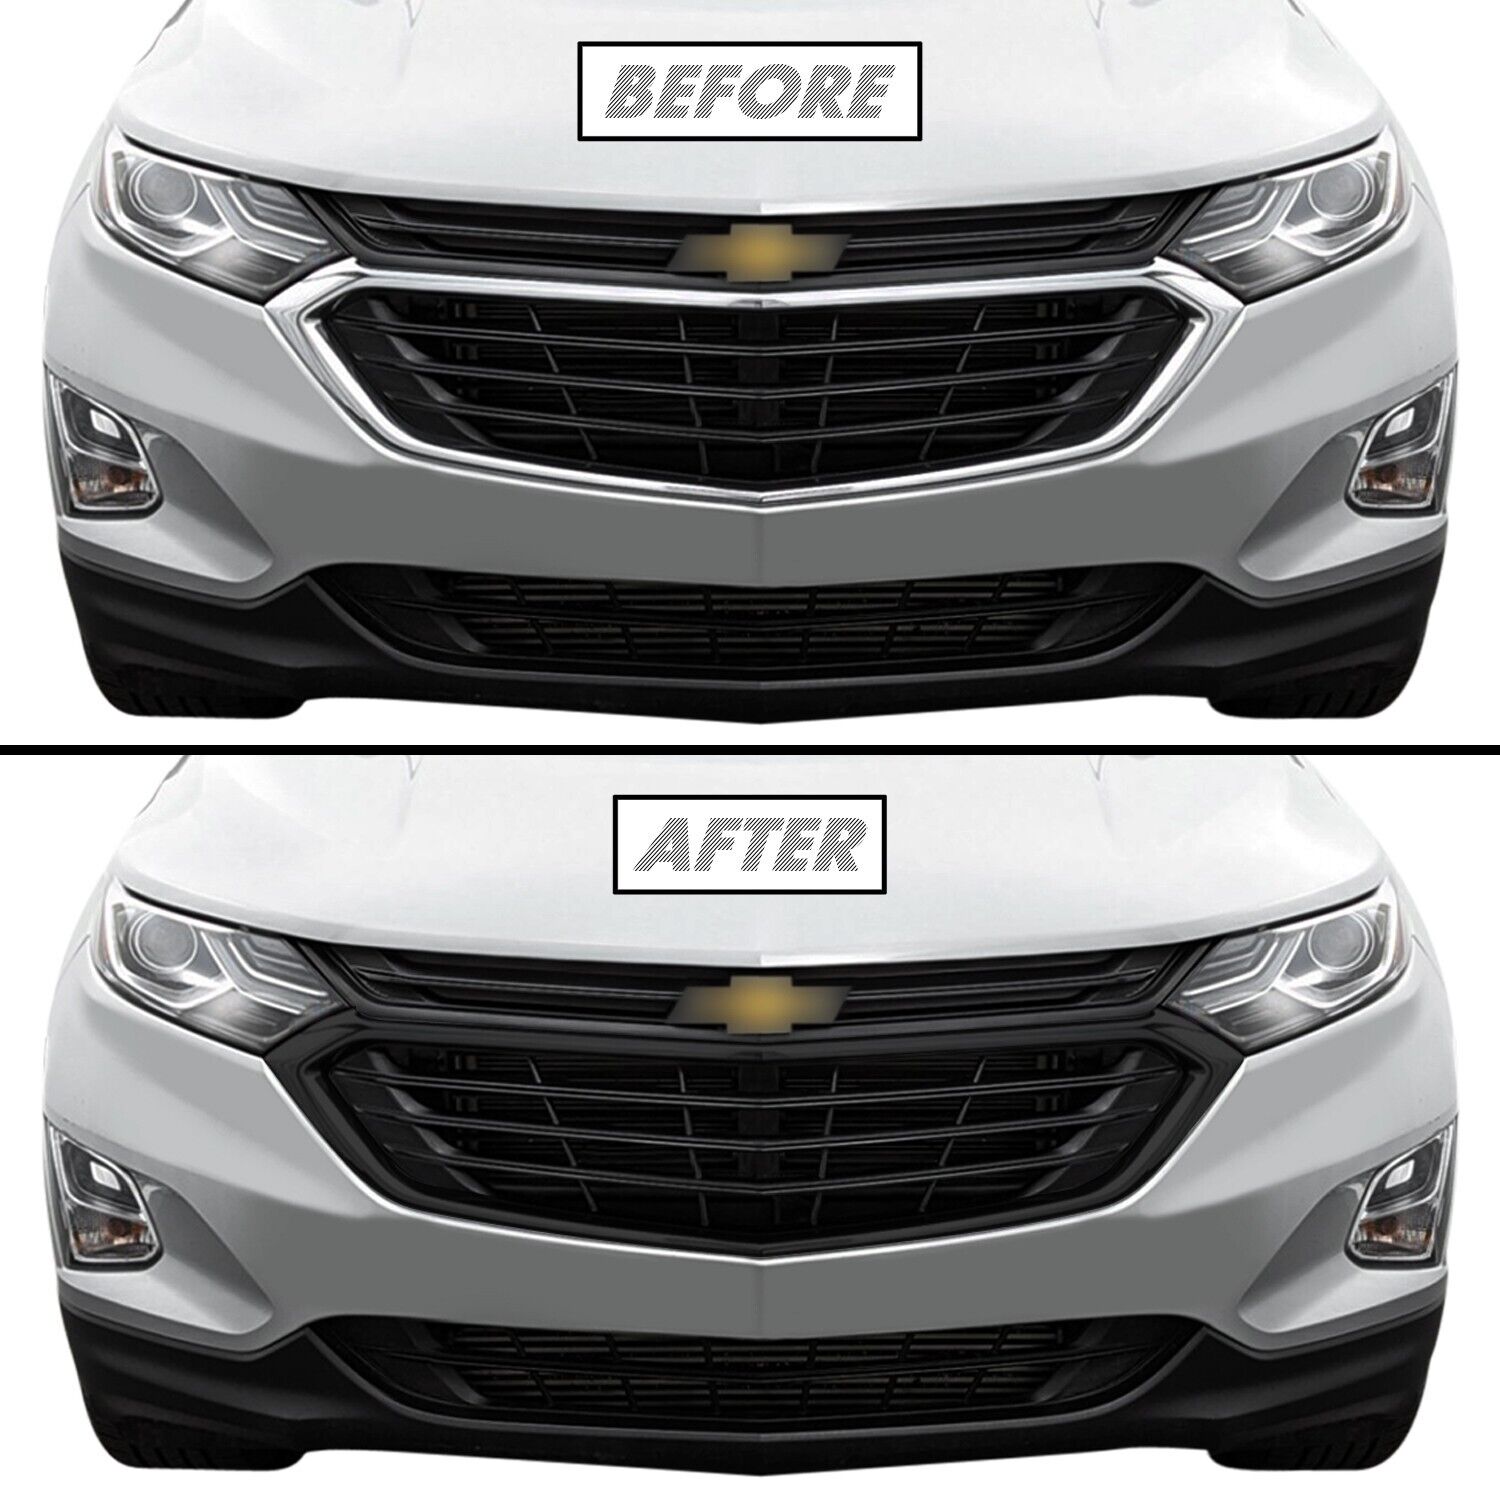 Chrome Delete Blackout Vinyl Overlay for 2018-21 Chevy Equinox Grill Trim